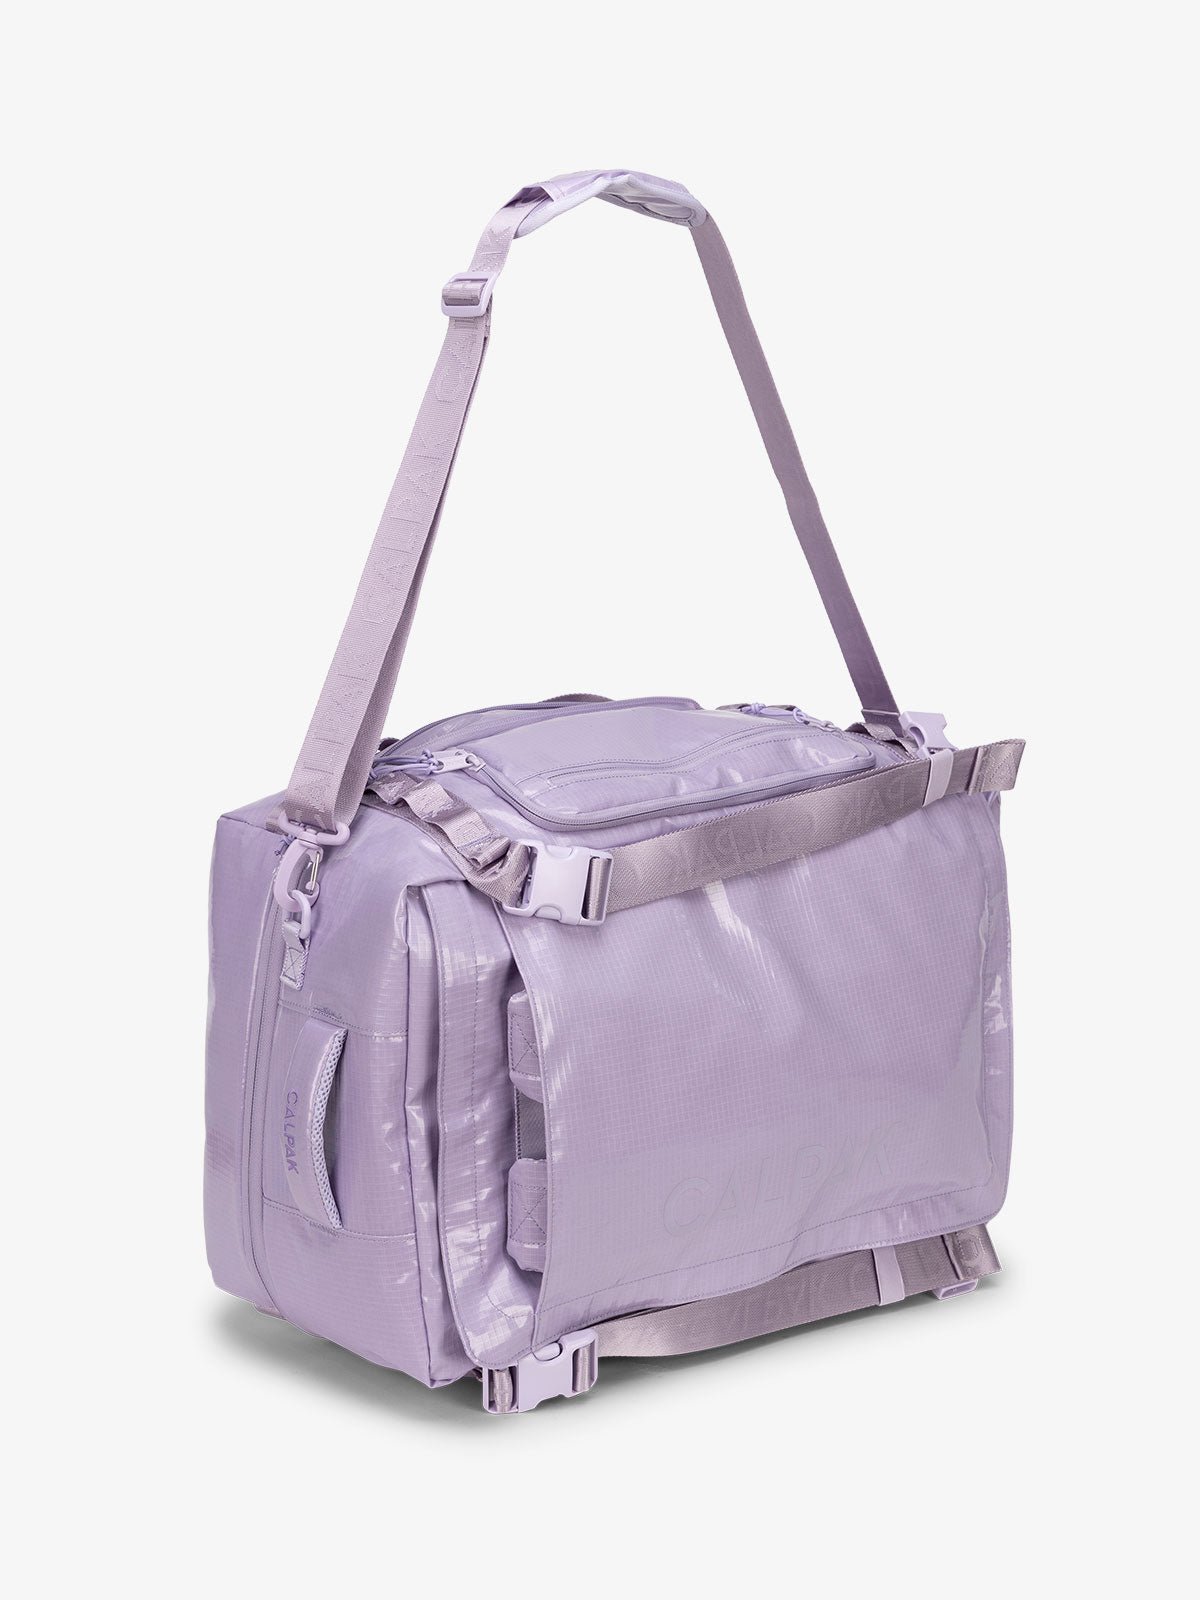 Light purple terra large 50L duffel backpack with removable and adjustable body shoulder strap